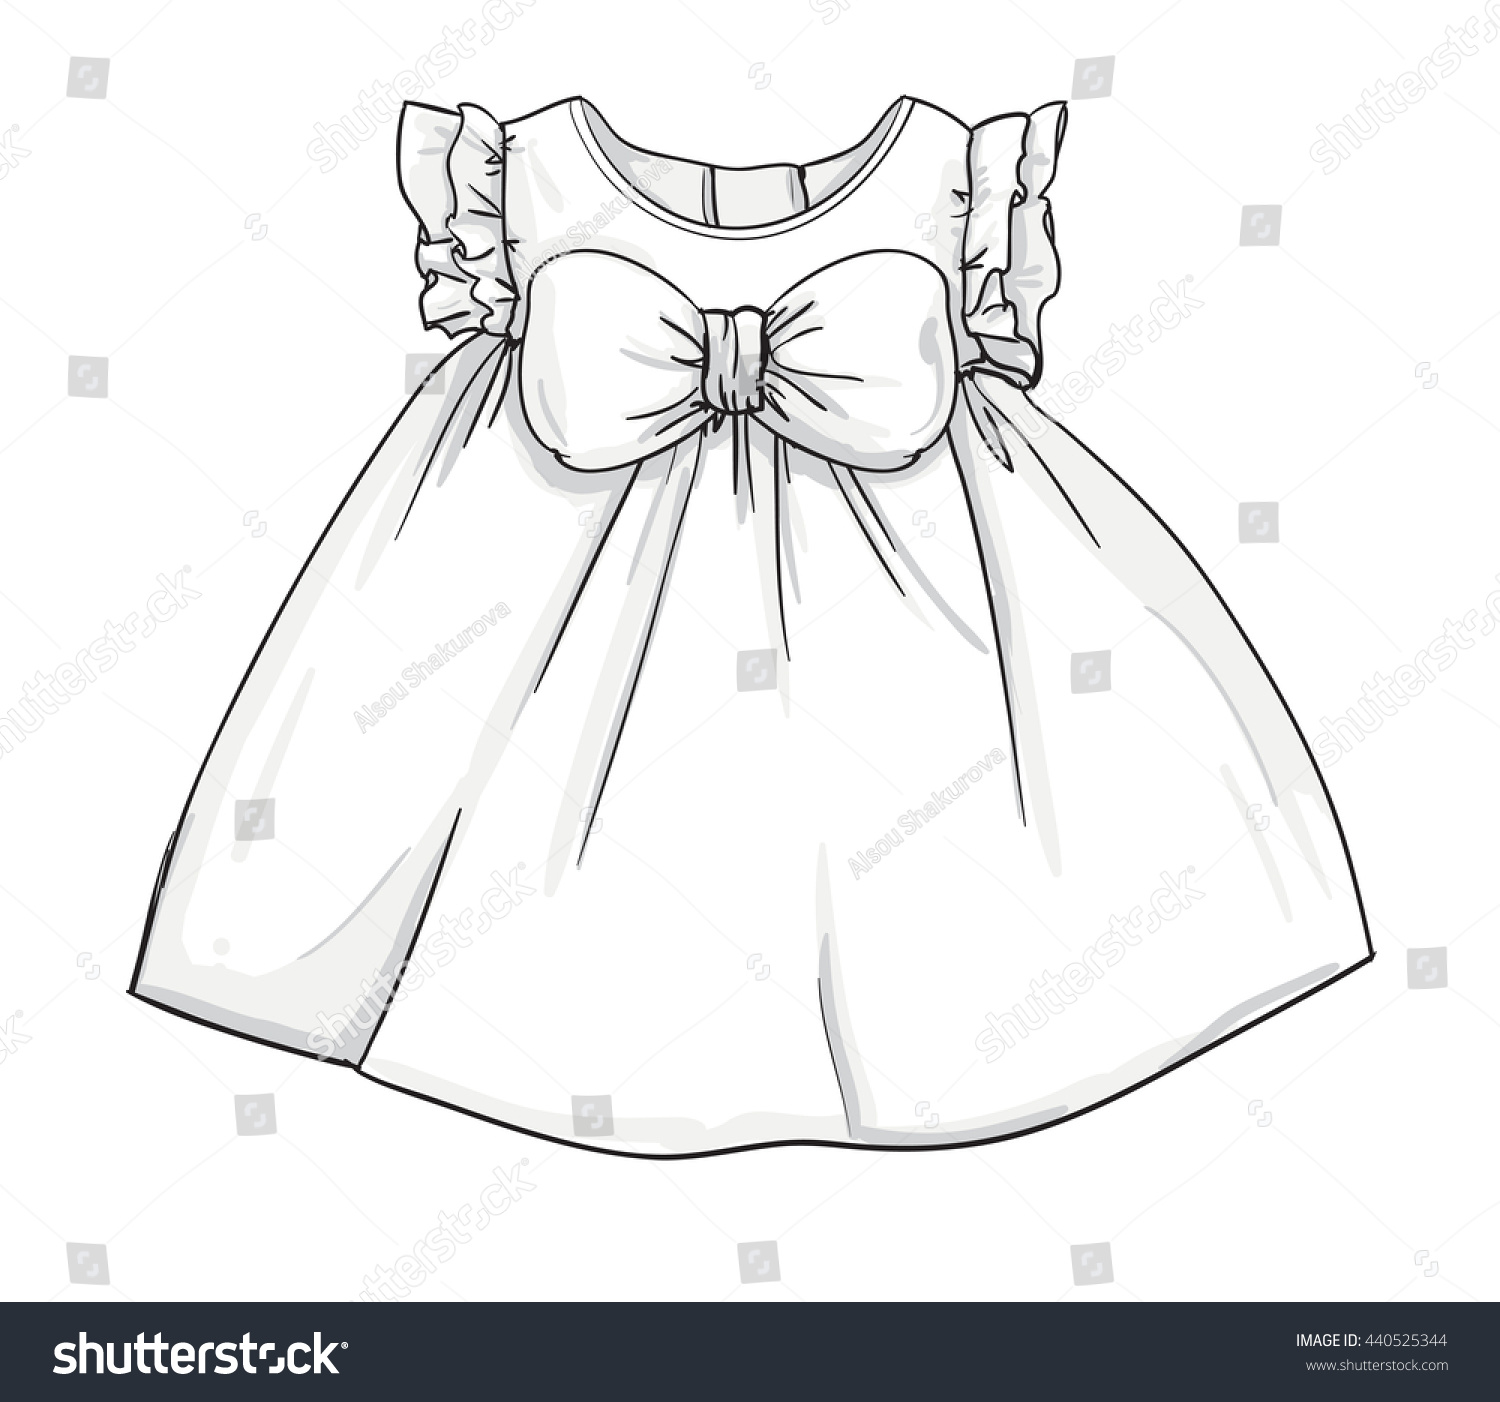 Download Baby Fashion Baby Clothing Vector Illustration Stock Vector 440525344 - Shutterstock